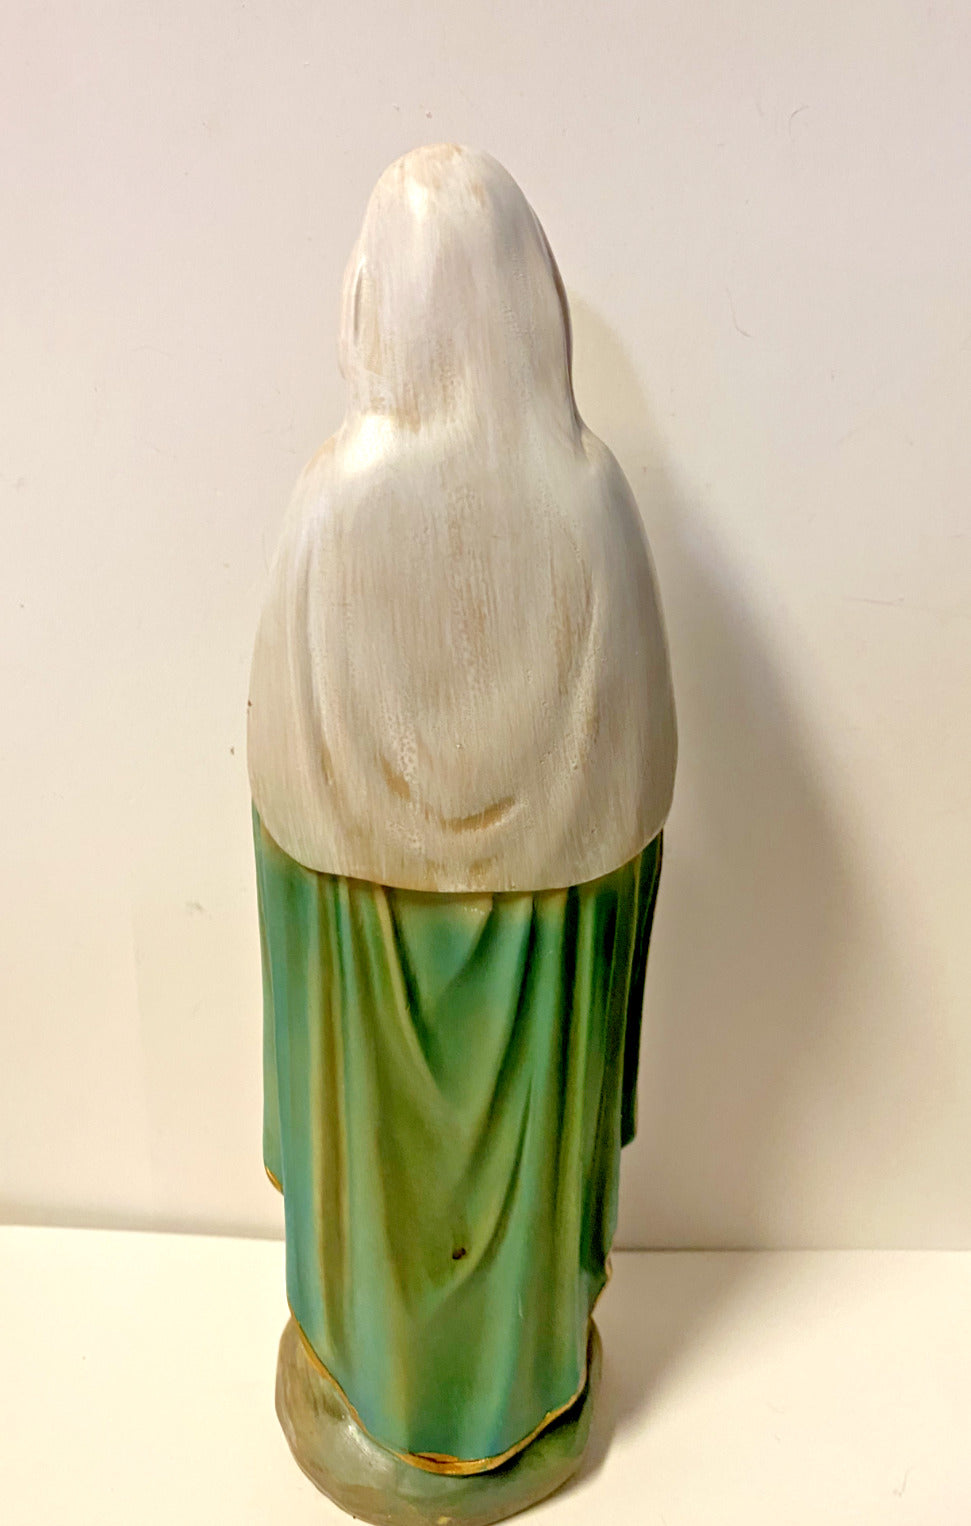 Mary, Mother of Jesus Statue 8"  Statue, New - Bob and Penny Lord